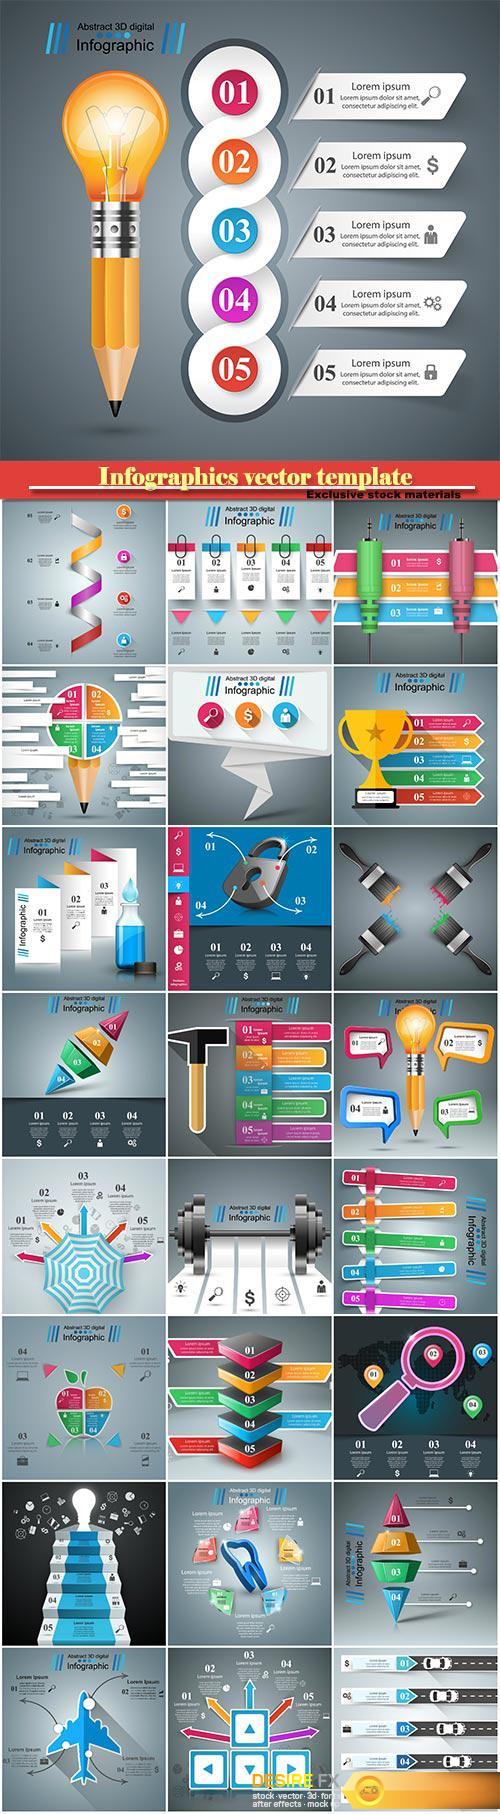 Infographics vector template for business presentations or information banner # 9